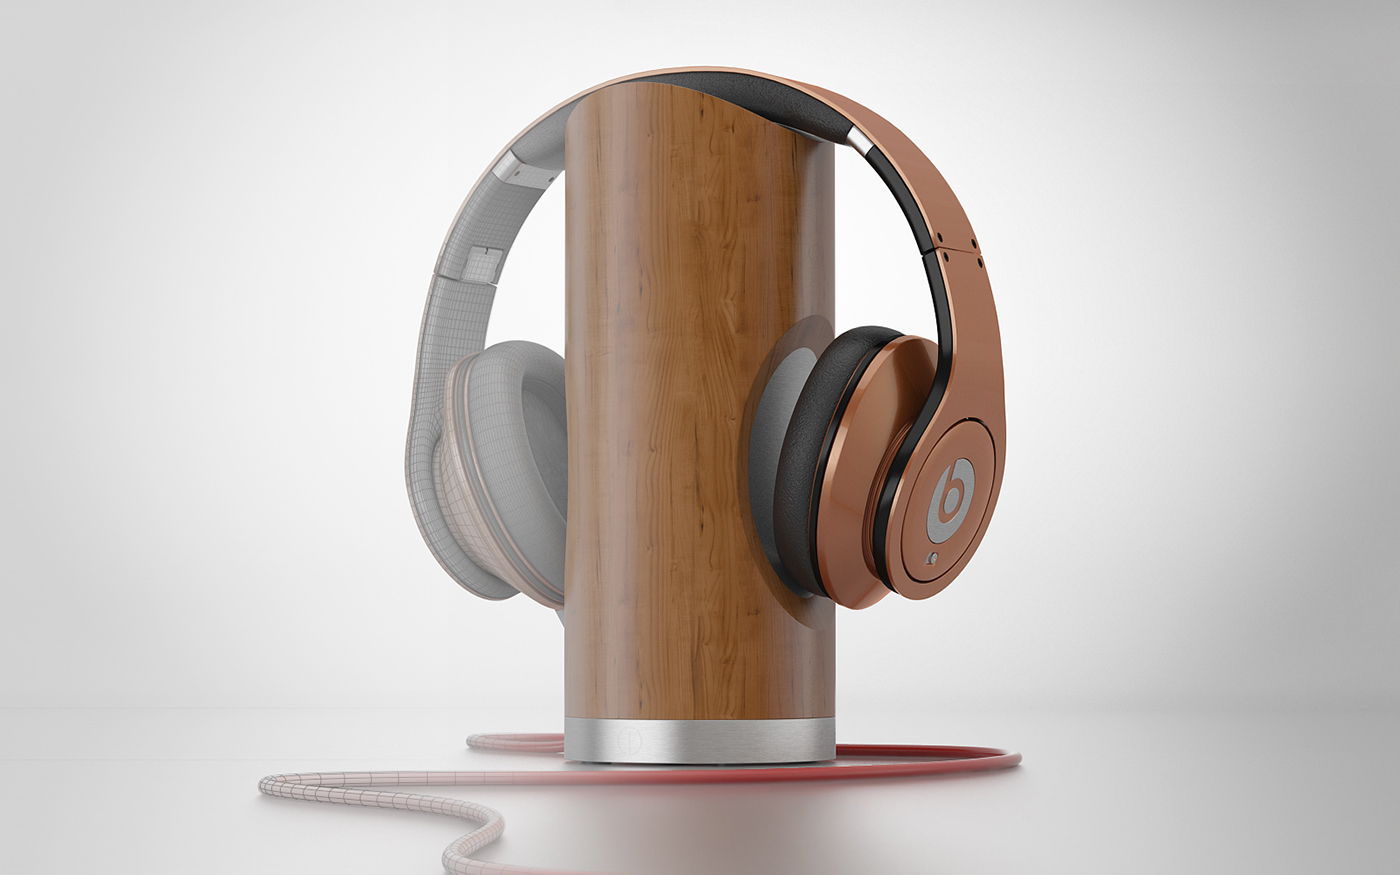 headphones stand concept product design 